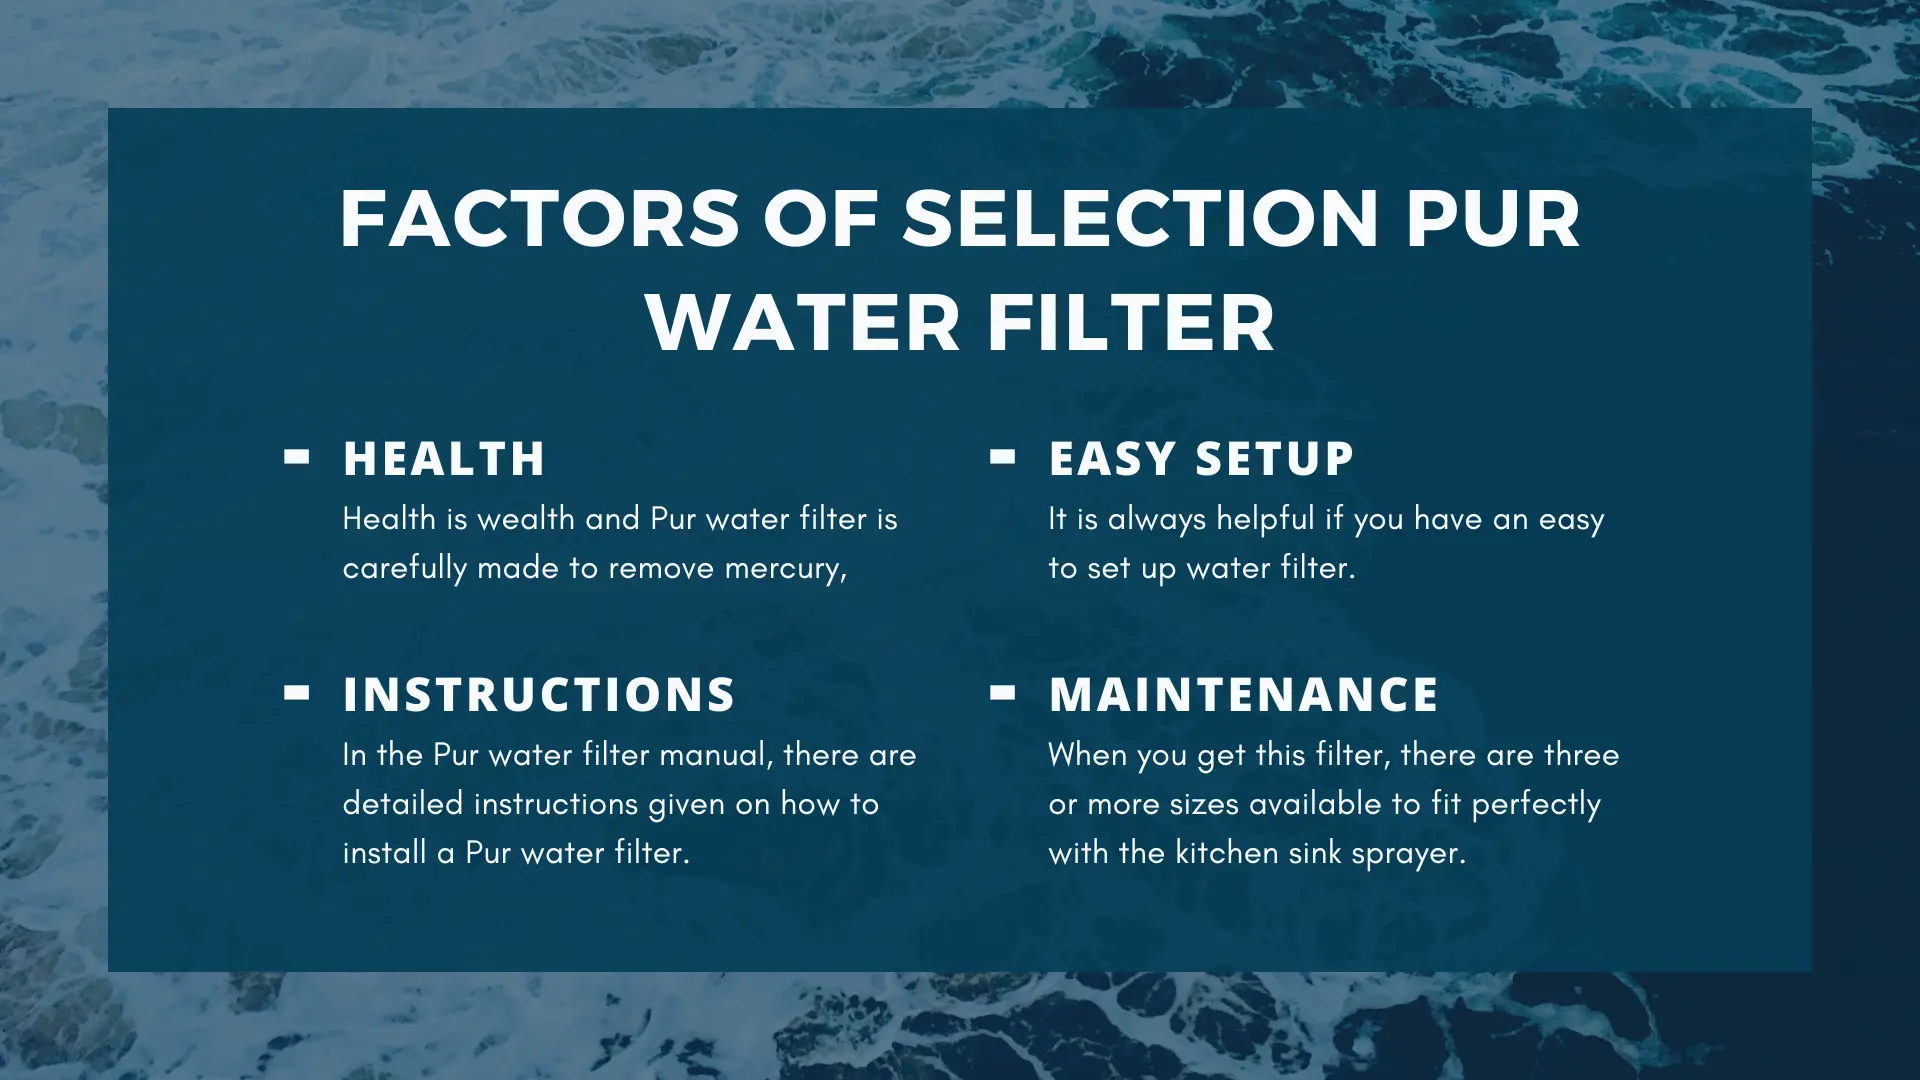 Factors of Selection Pur Water Filter